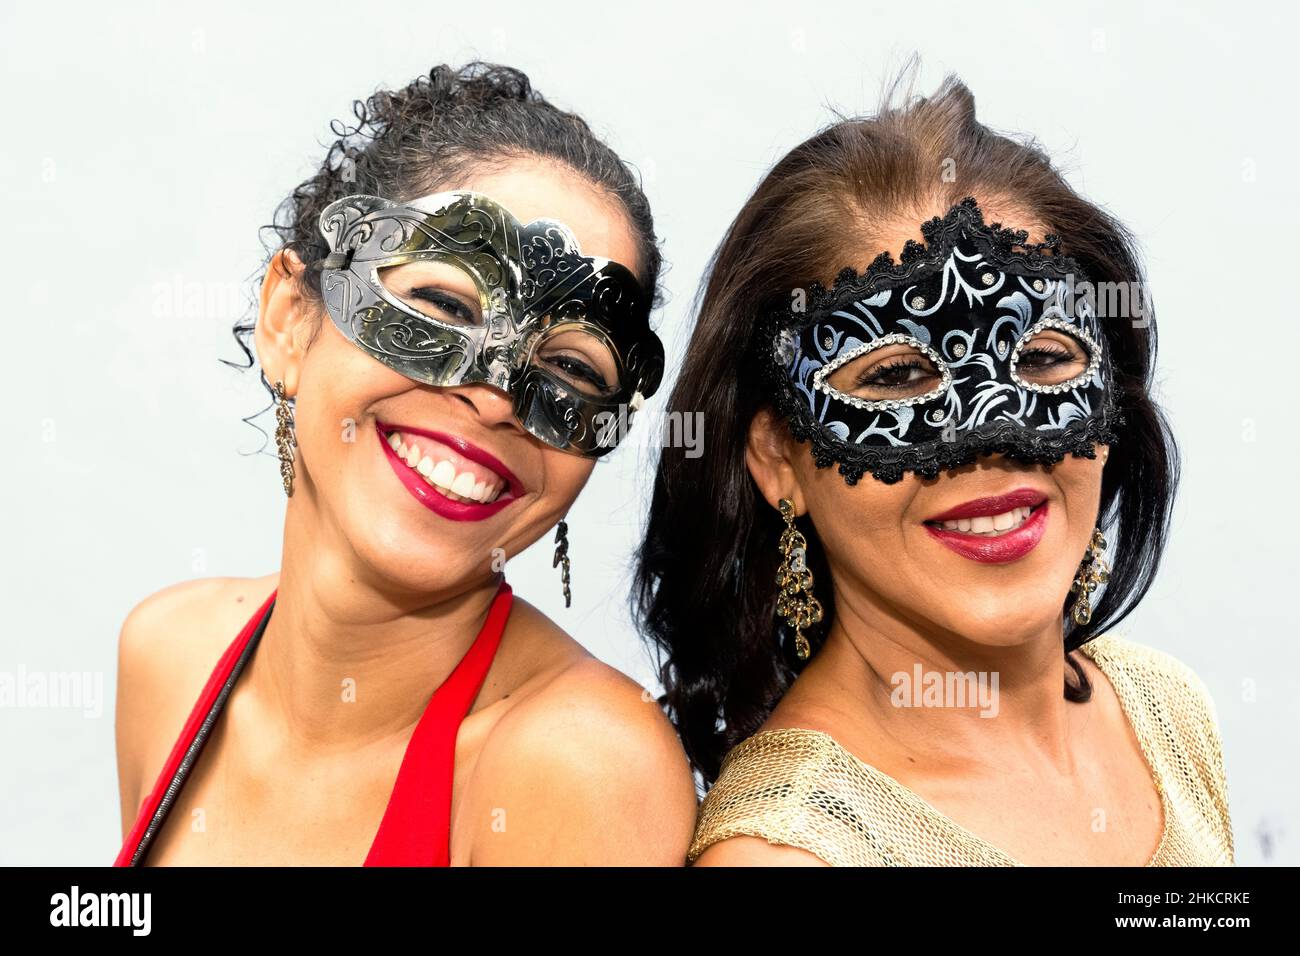 Close-up of face of two women wearing Venice Carnival mask against light background. Salvador, Bahia, Brazil. Stock Photo